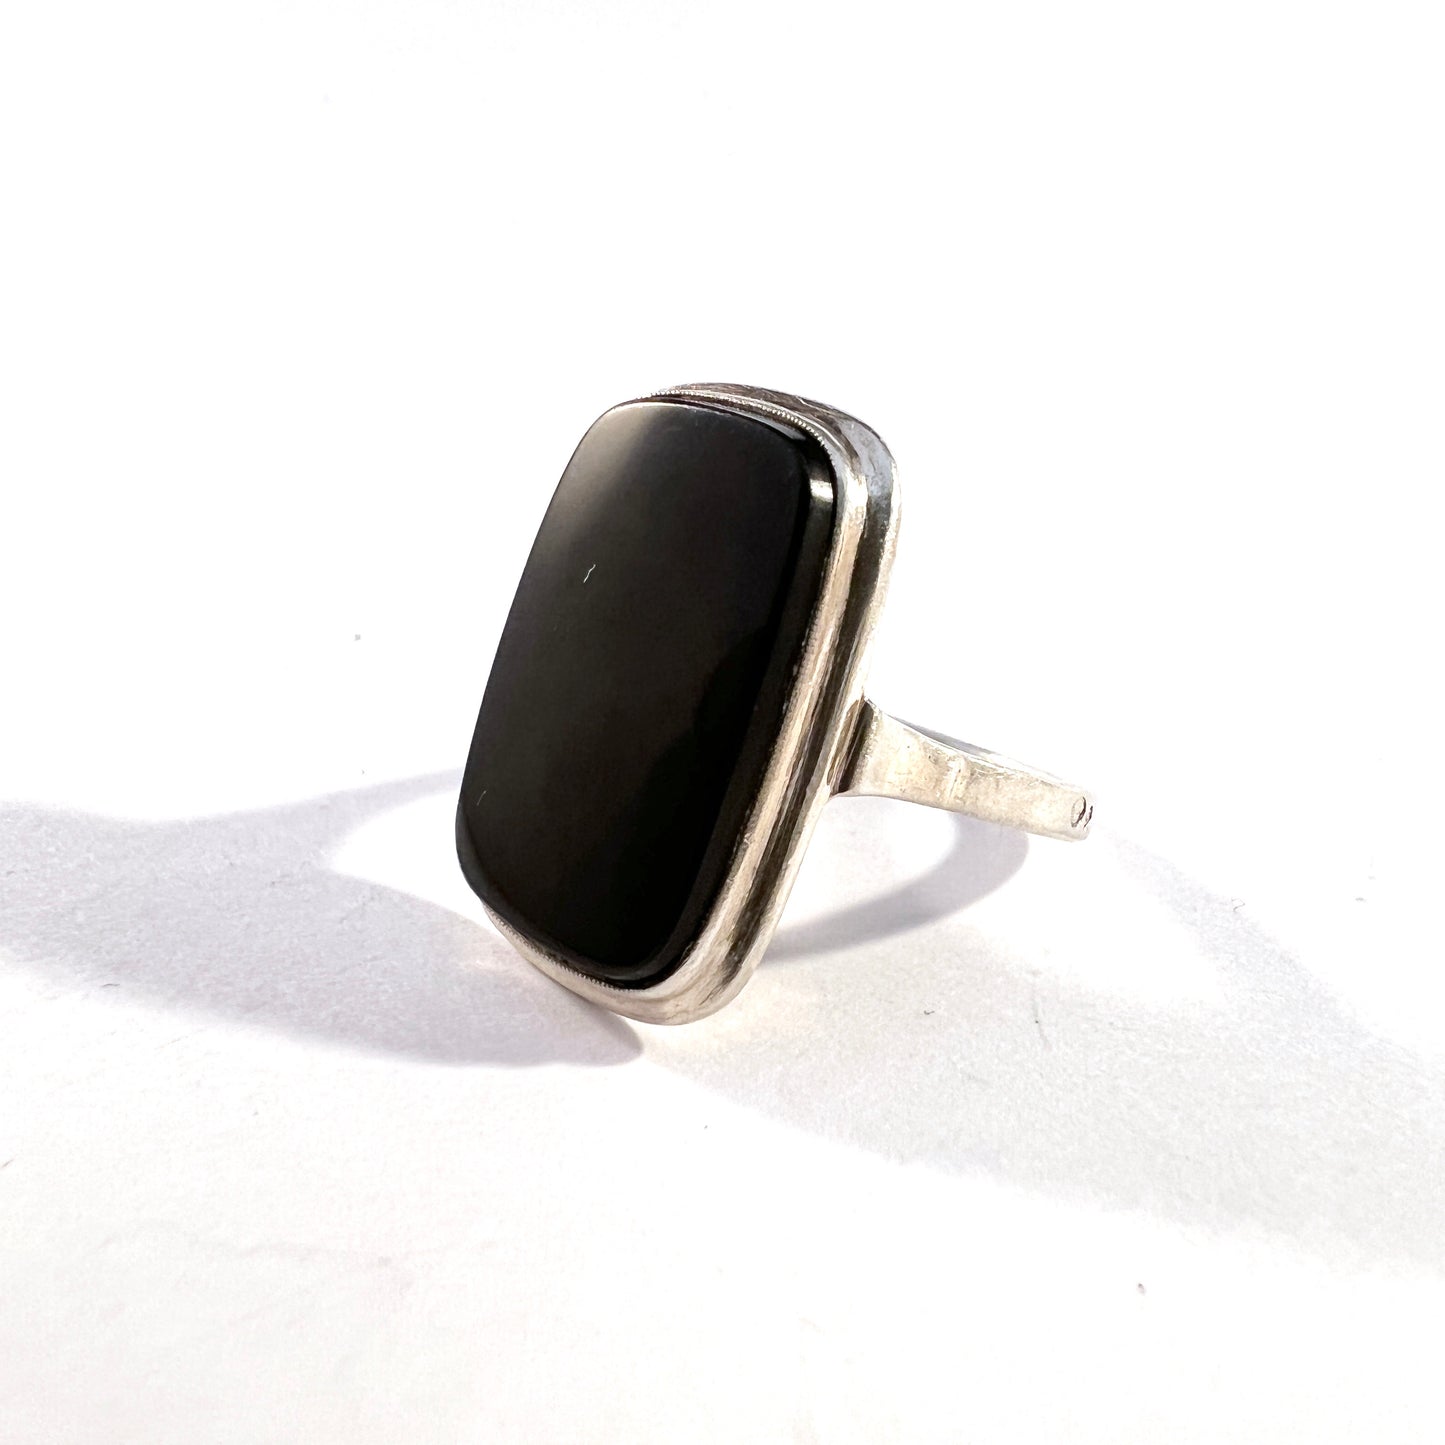 Vintage 1940s. Solid 830 Silver Onyx Signet Ring. Swedish Import.